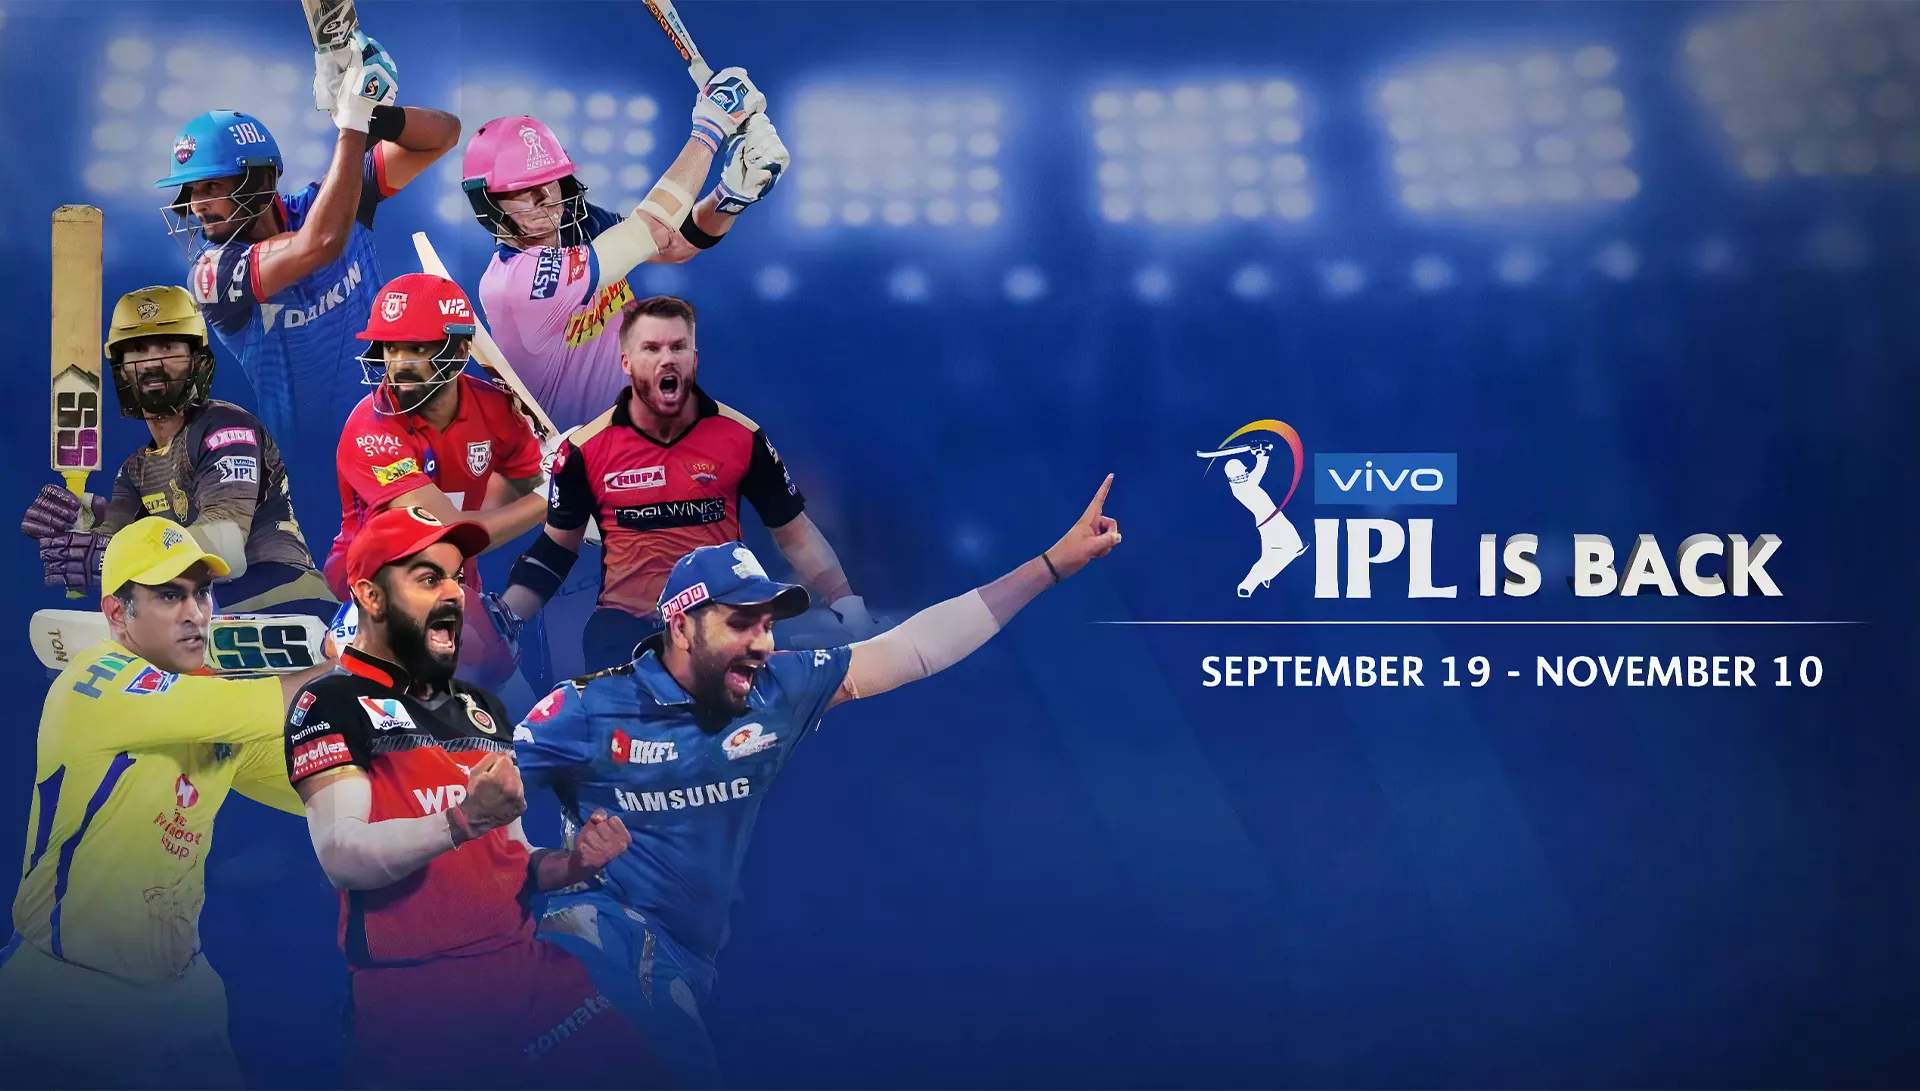 You can place bets on IPL after registering on the site.